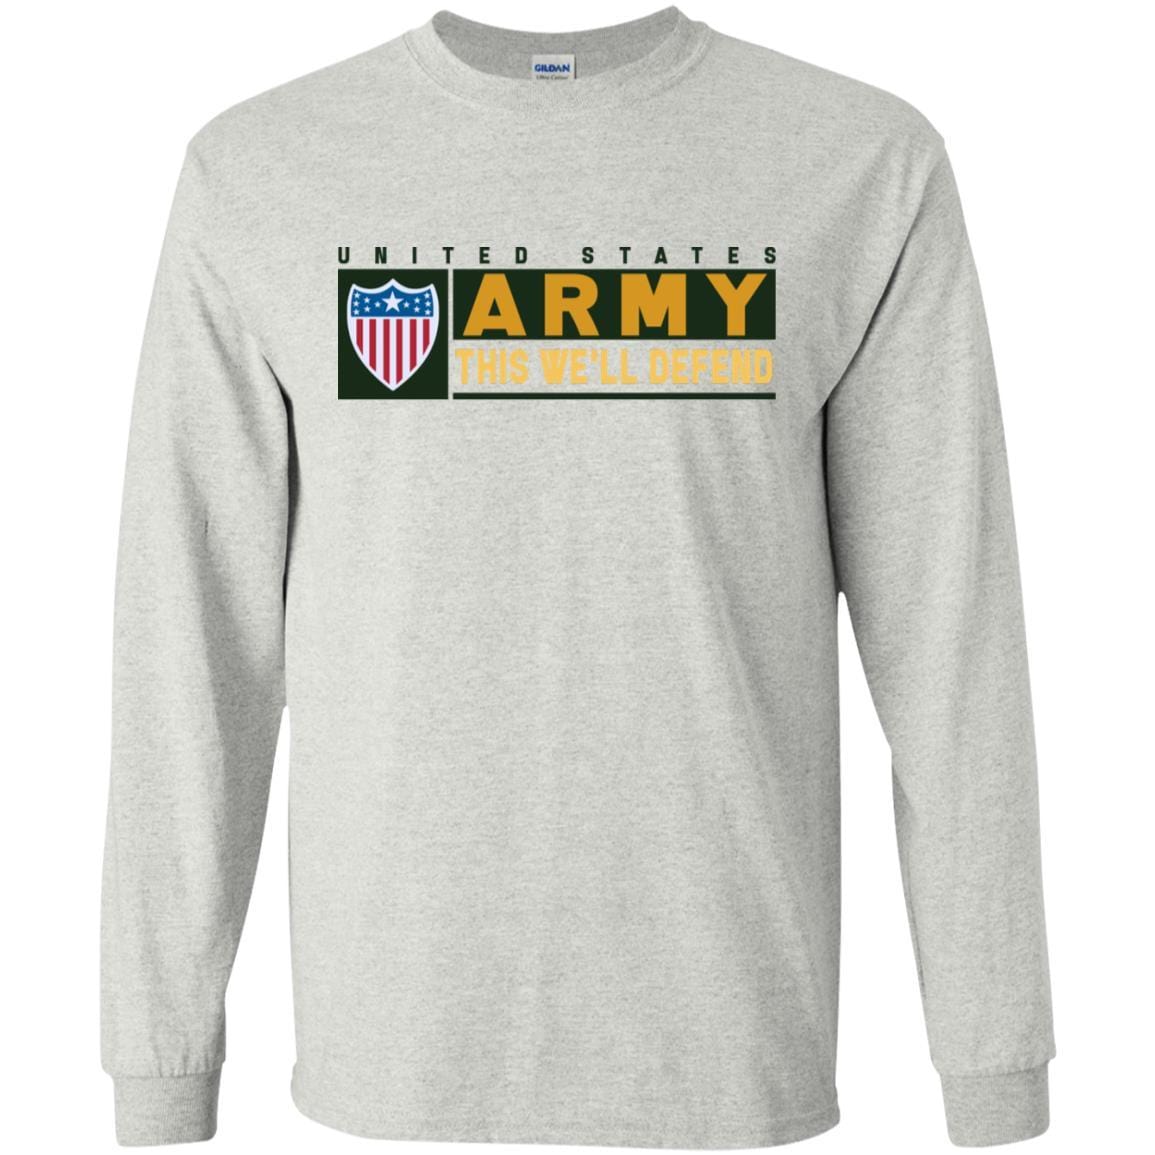 US Army Adjutant General- This We'll Defend T-Shirt On Front For Men-TShirt-Army-Veterans Nation